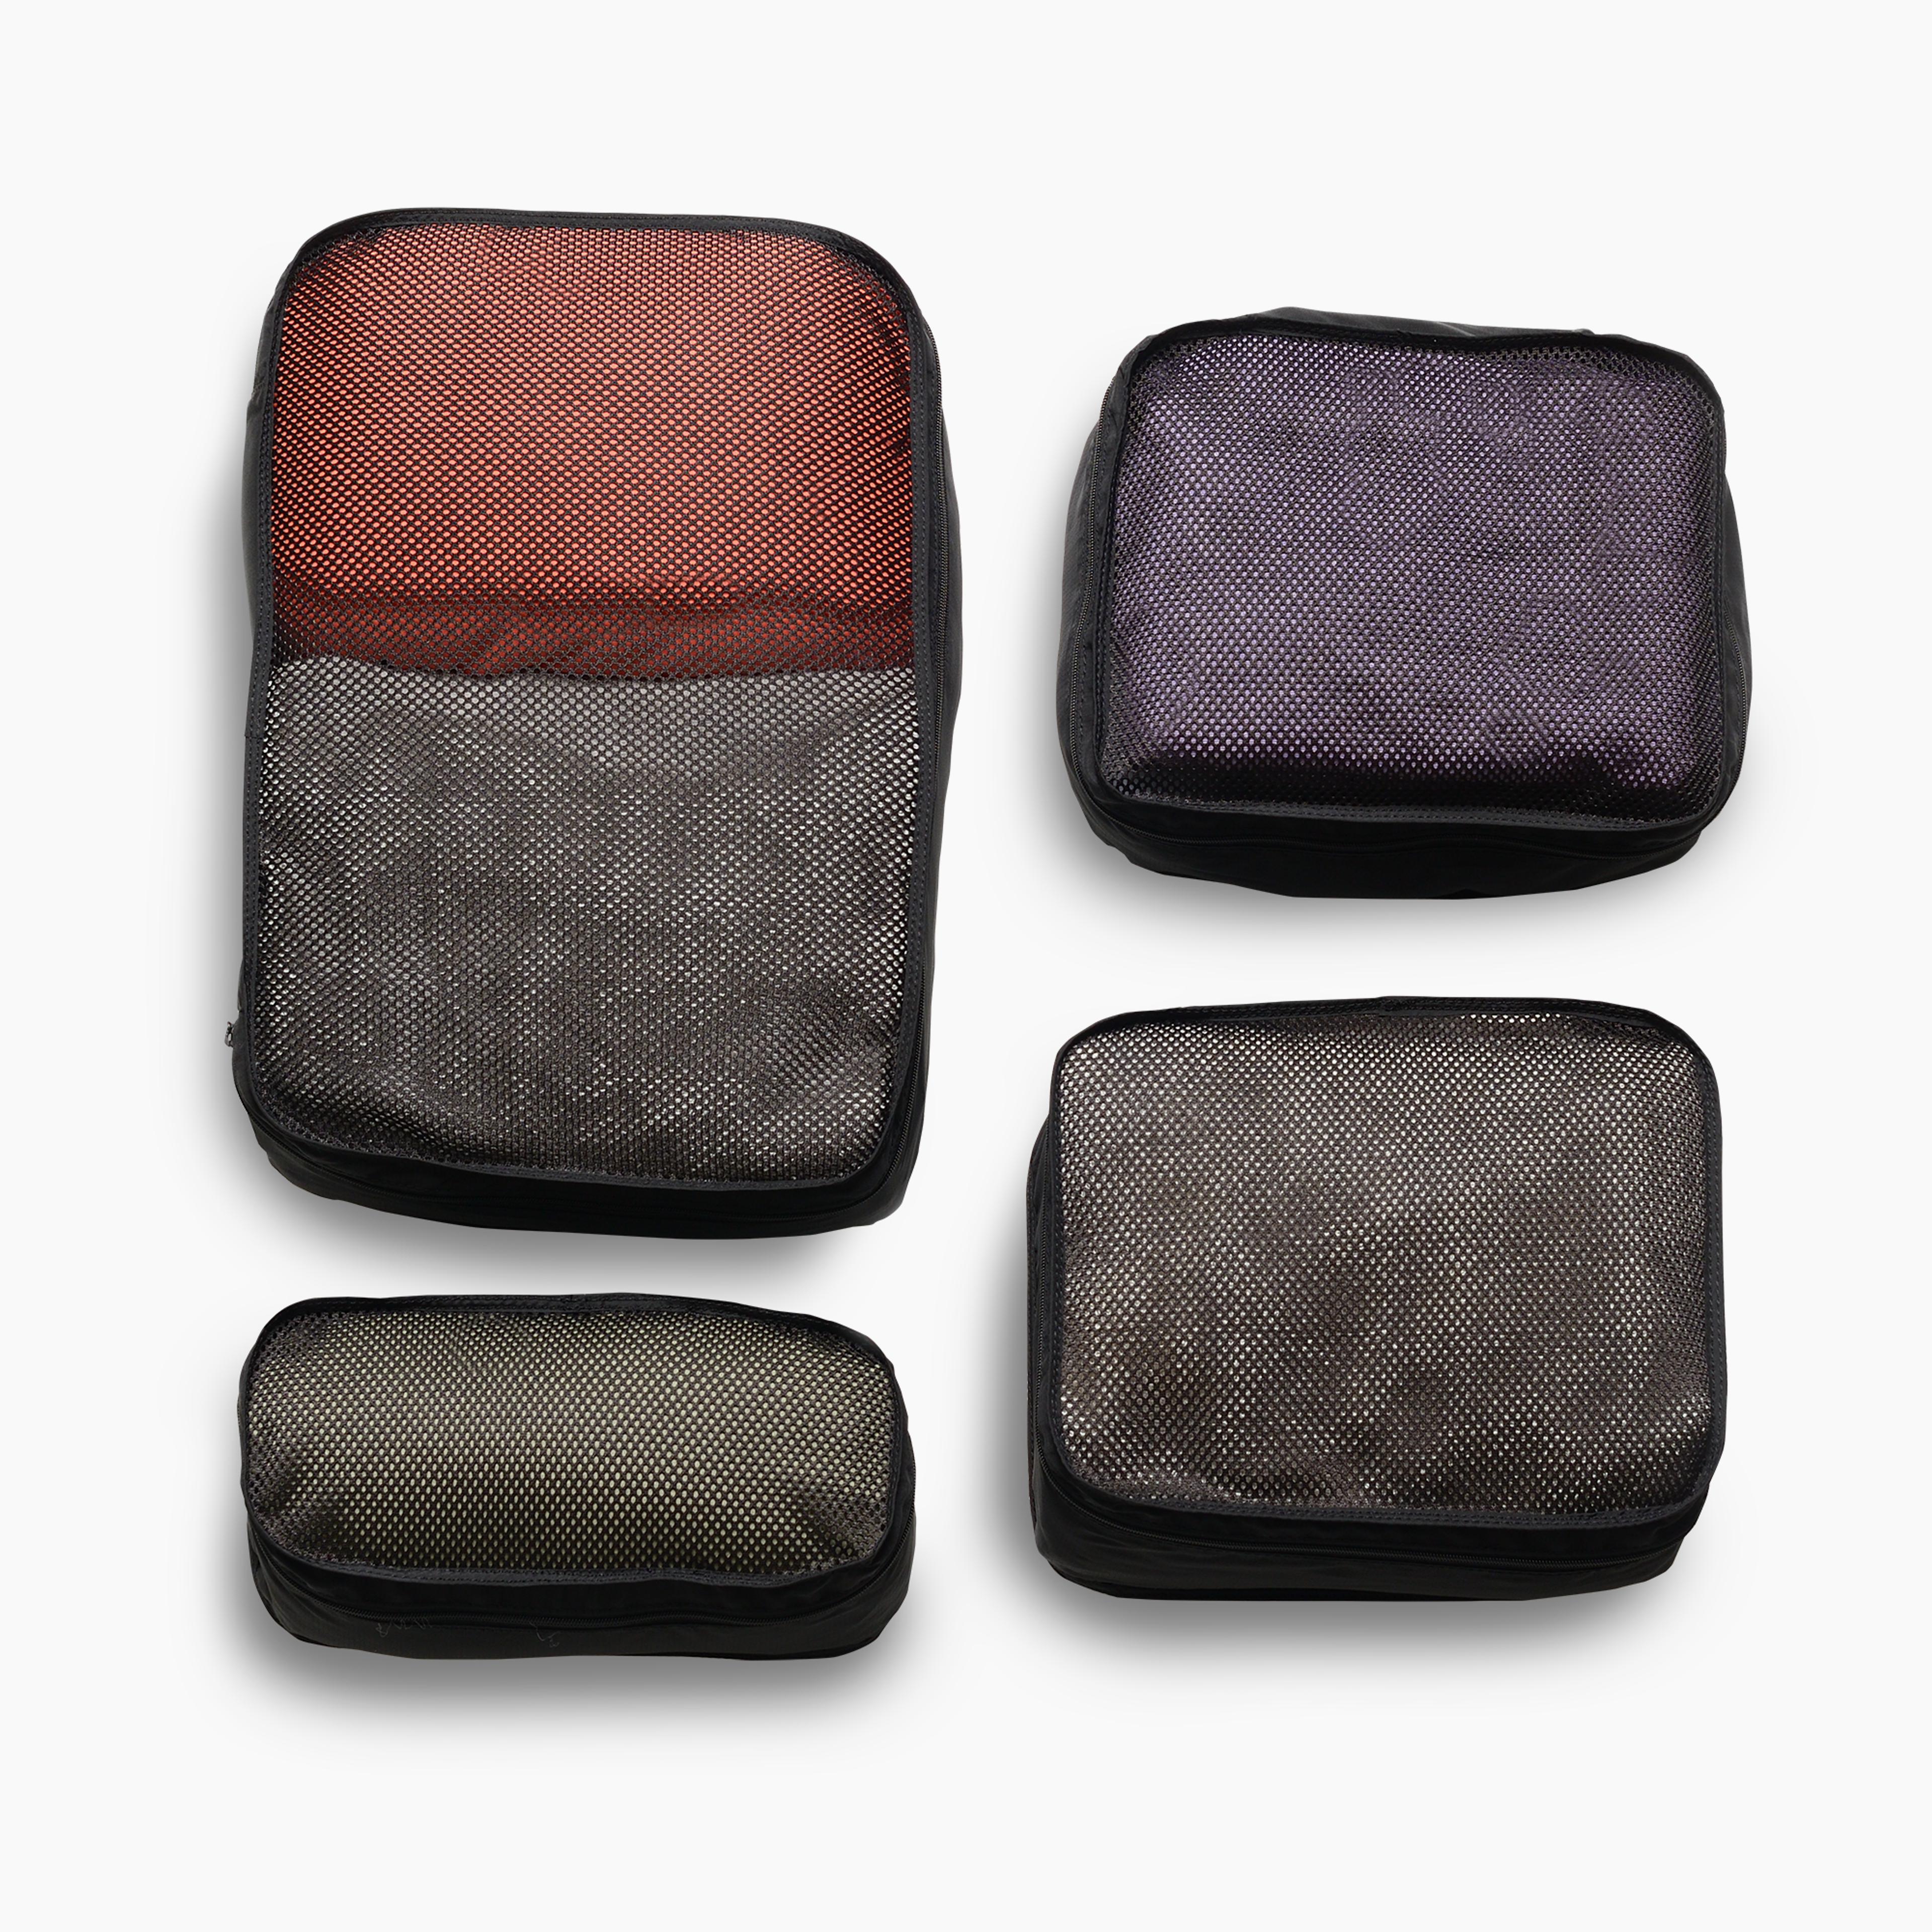 Packing Cubes - Set of 4